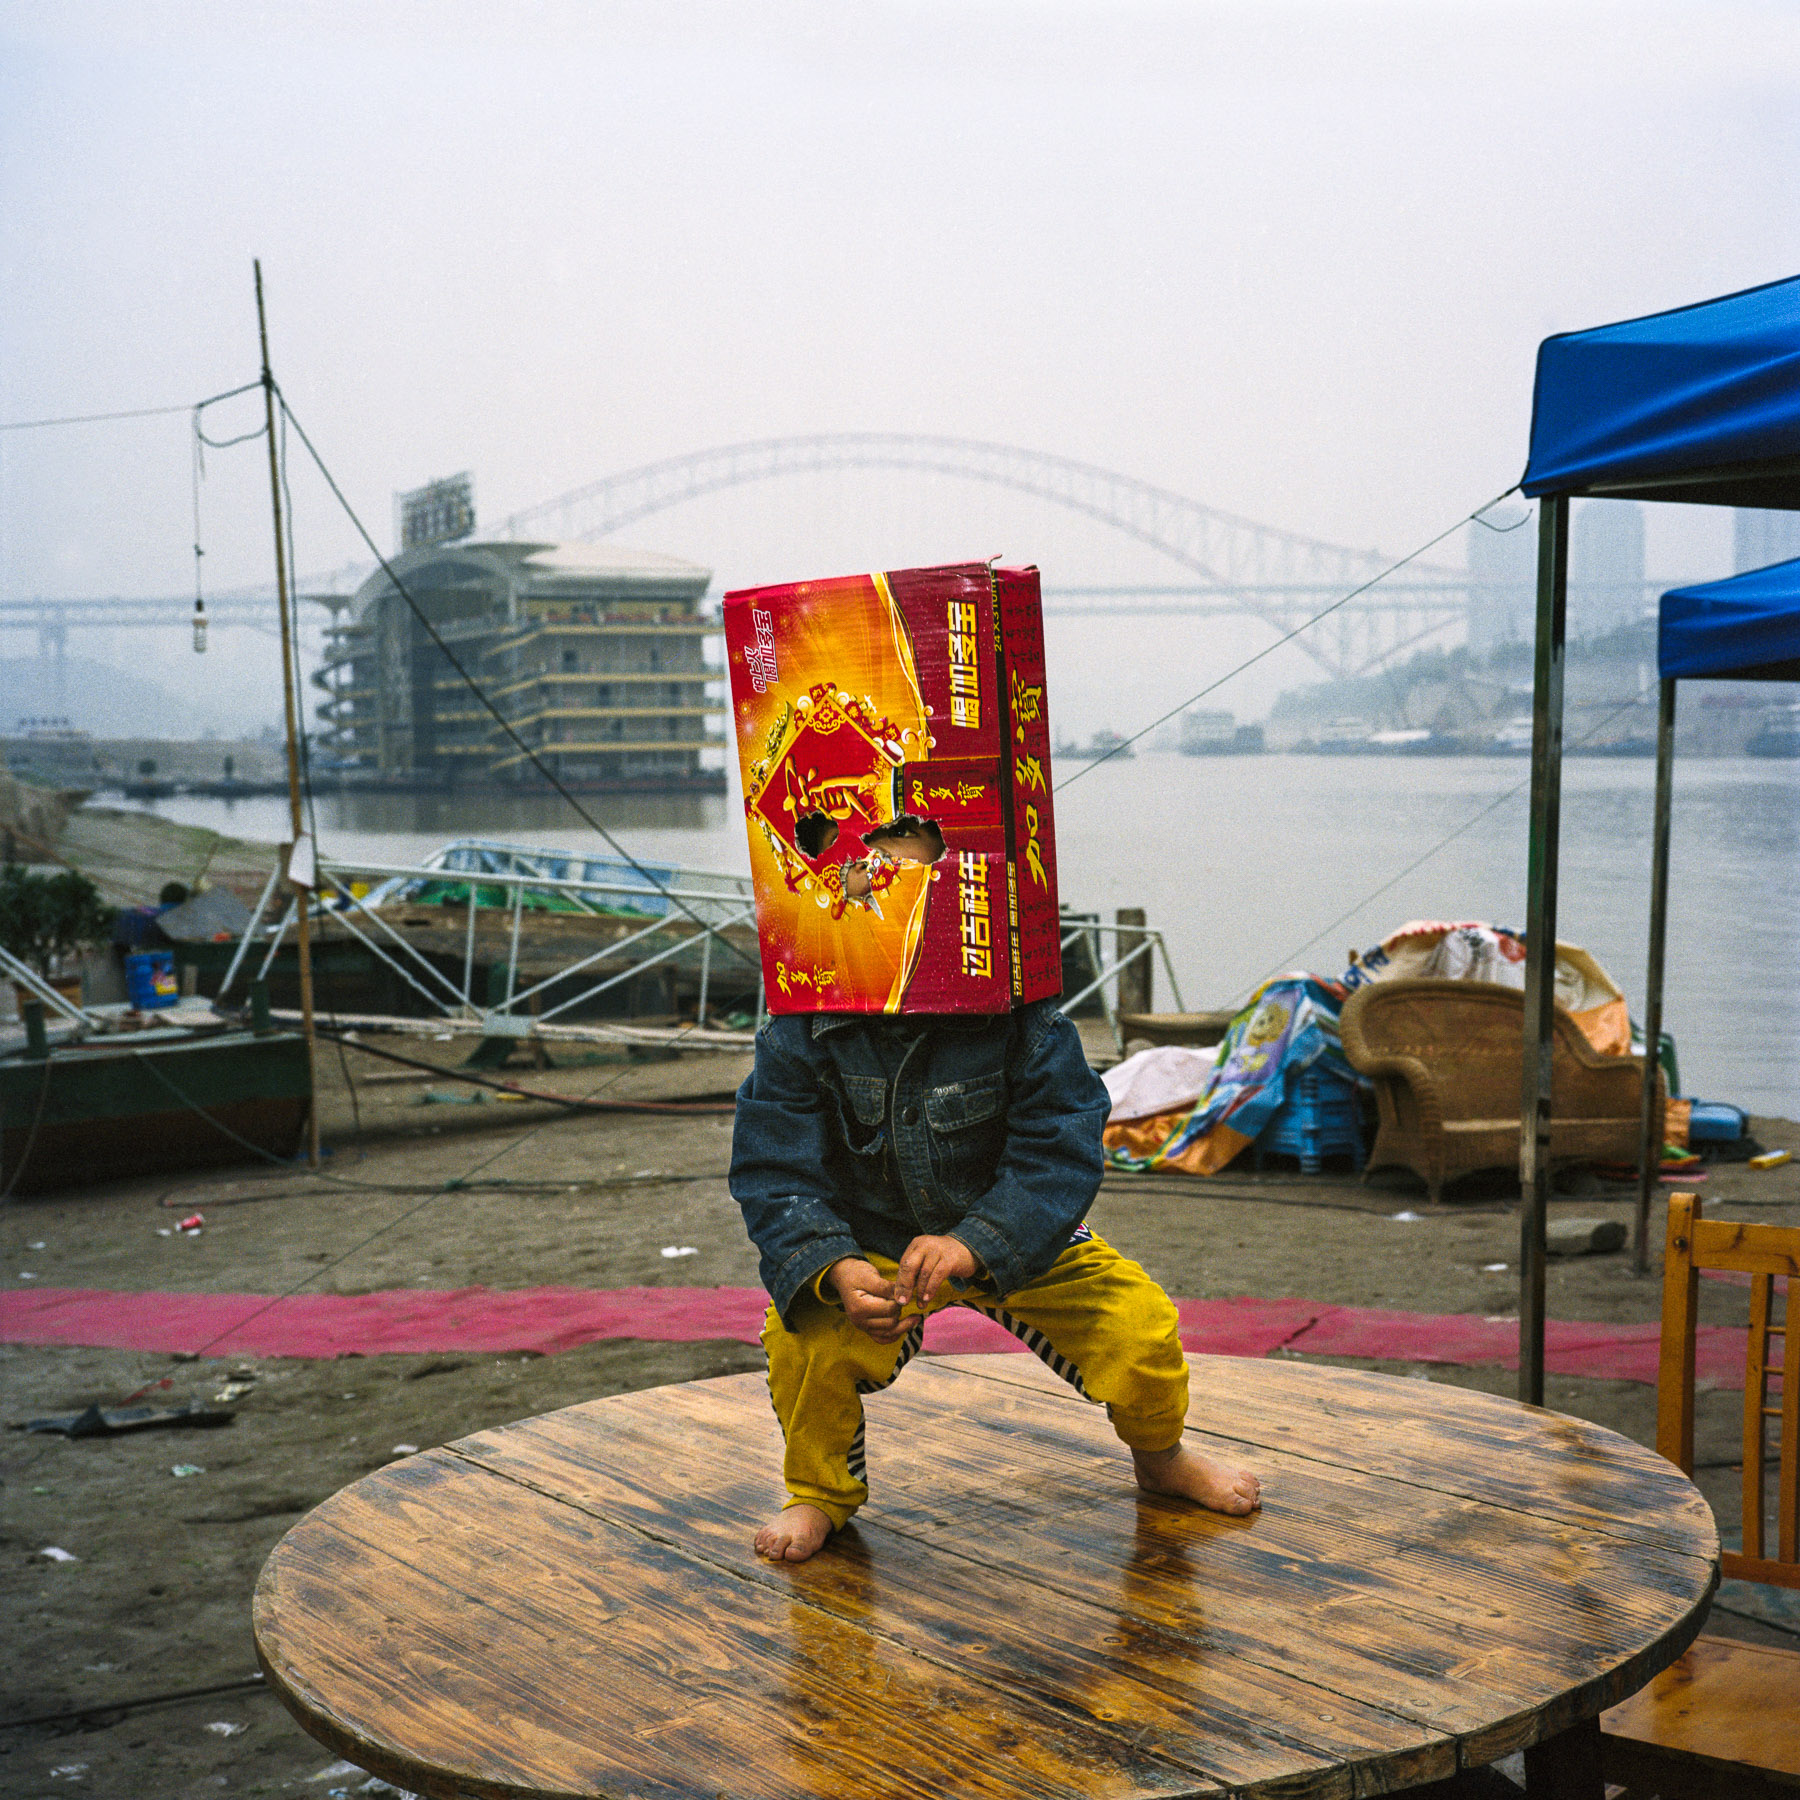  Chongqing, China. 2013. Child with a cardboard bag over his head on the banks of the Yangtze river in downtown Chongqing.
Chongqing is a major city in the Southwest of China and one of the five national central cities in the PRC. It is one of PRC's 